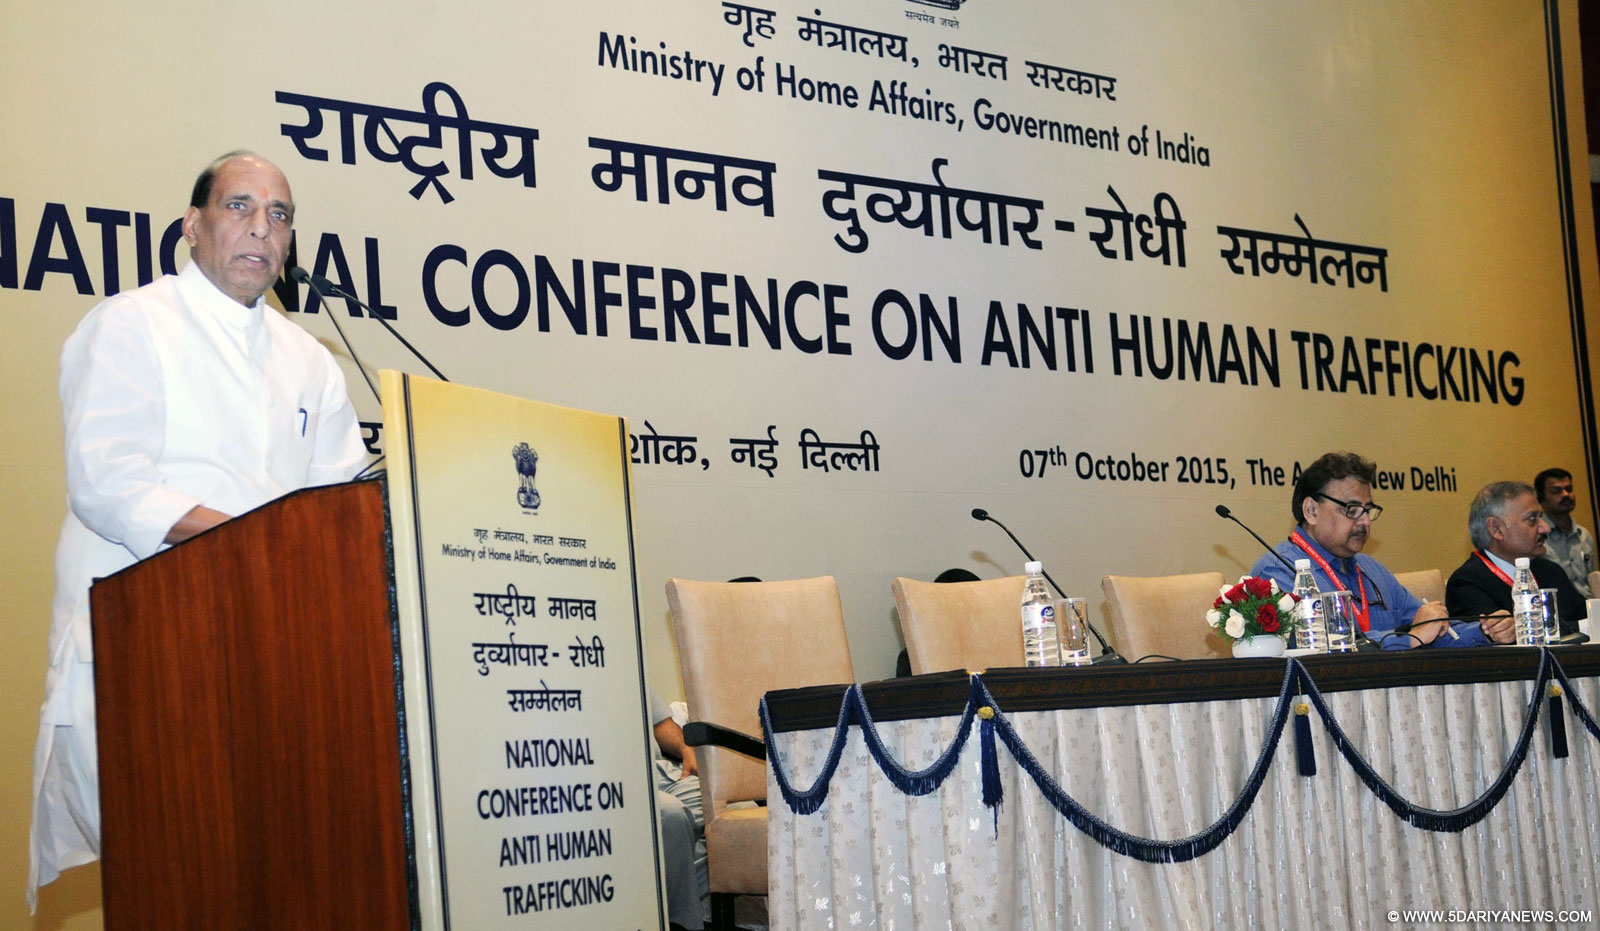 Union Home Minister Rajnath Singh lighting the lamp to inaugurate the National Conference on Anti Human Trafficking, in New Delhi on October 07, 2015. The Director, CBI, Anil Kumar Sinha is also seen. 